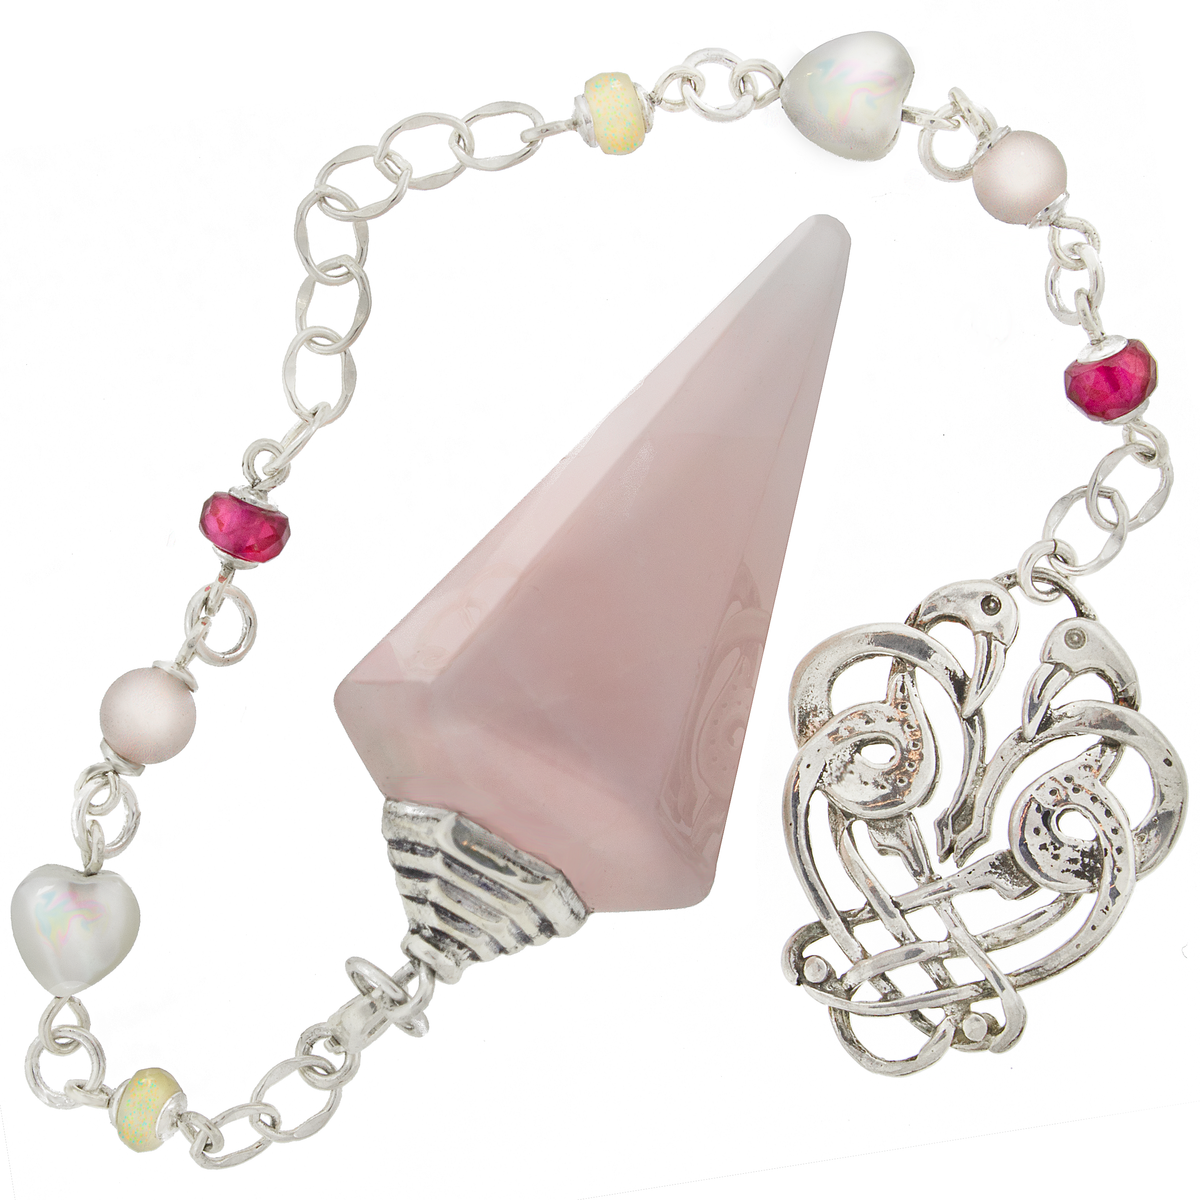 One of a Kind #369 - Rose Quartz, Ruby, Welo Opal, MOP and Sterling Silver Pendulum by Ask Your Pendulum